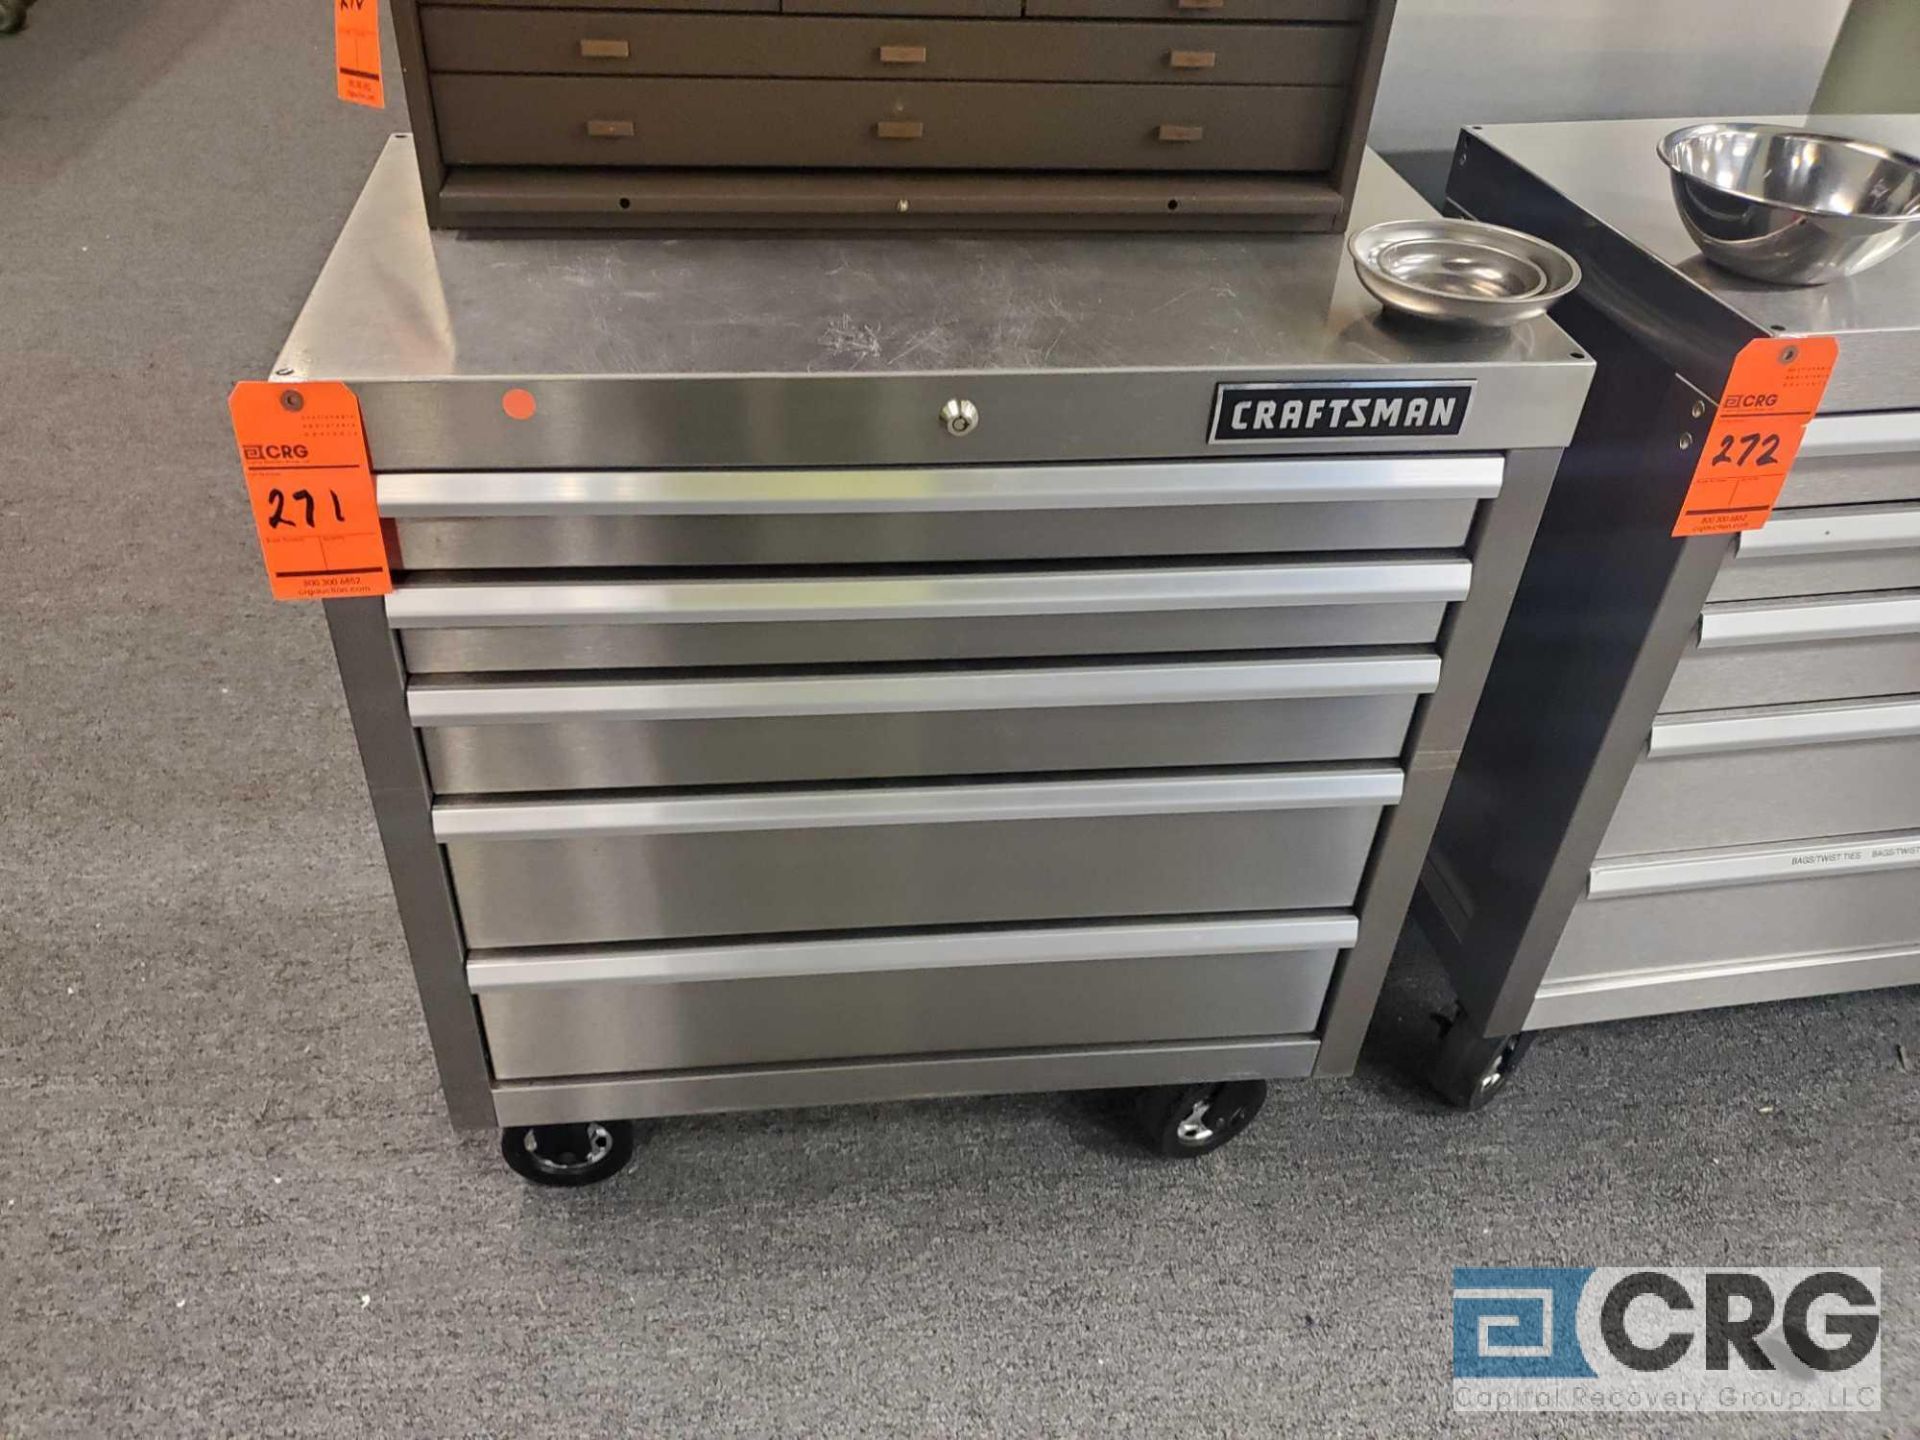 Craftsman 5-drawer stainless steel portable tool chest